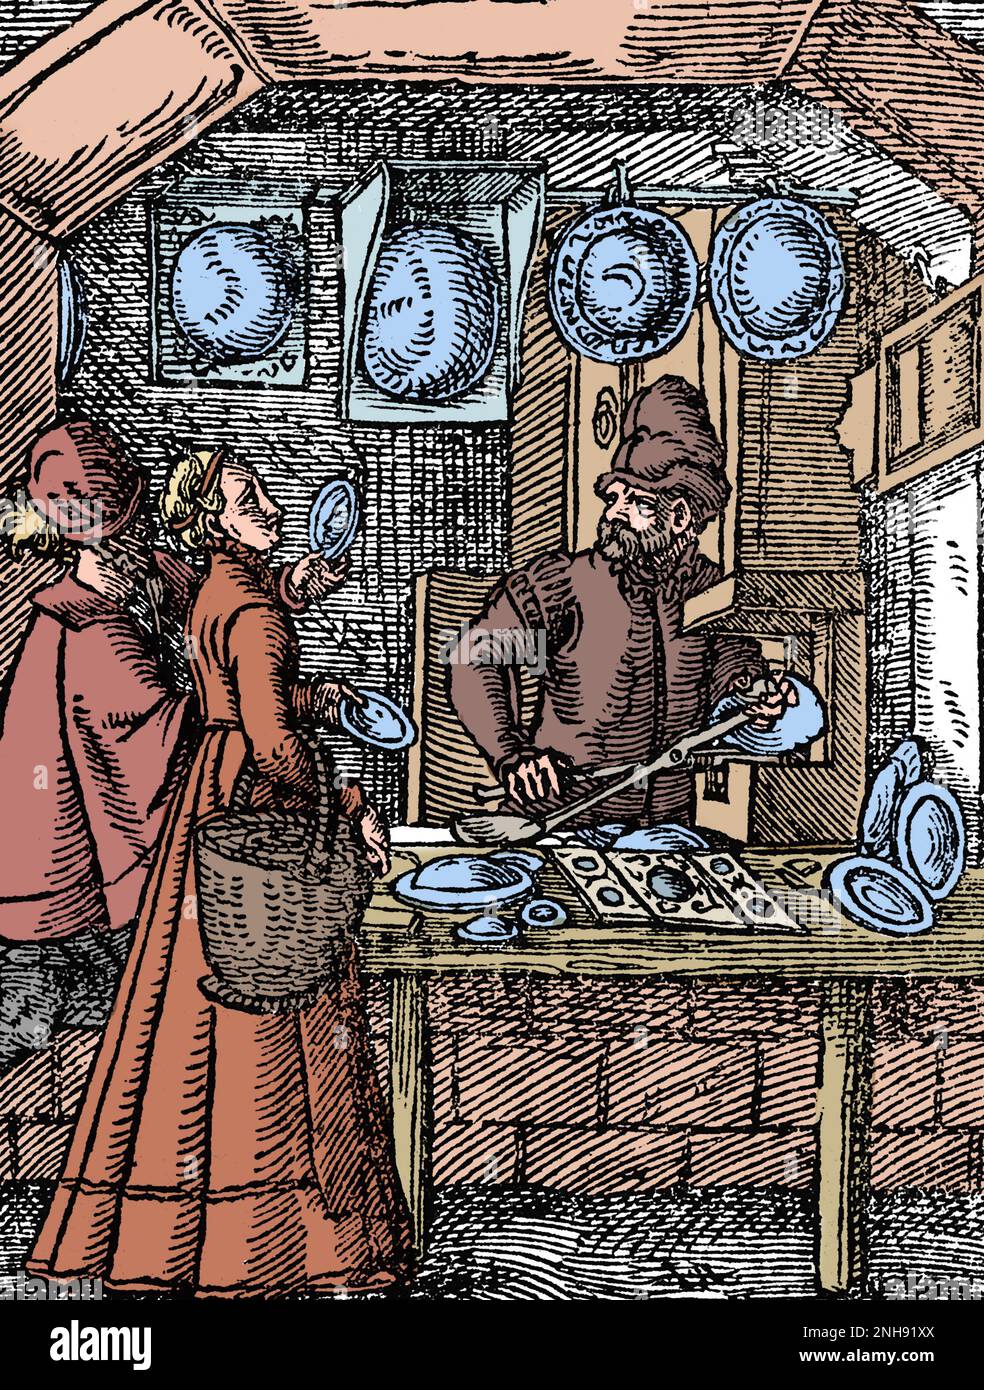 A mirror maker in his workshop, with convex mirrors on display and two customers trying out hand-held mirrors. Woodcut from Jost Amman's Book of Trades, 1568. Colorized. Stock Photo